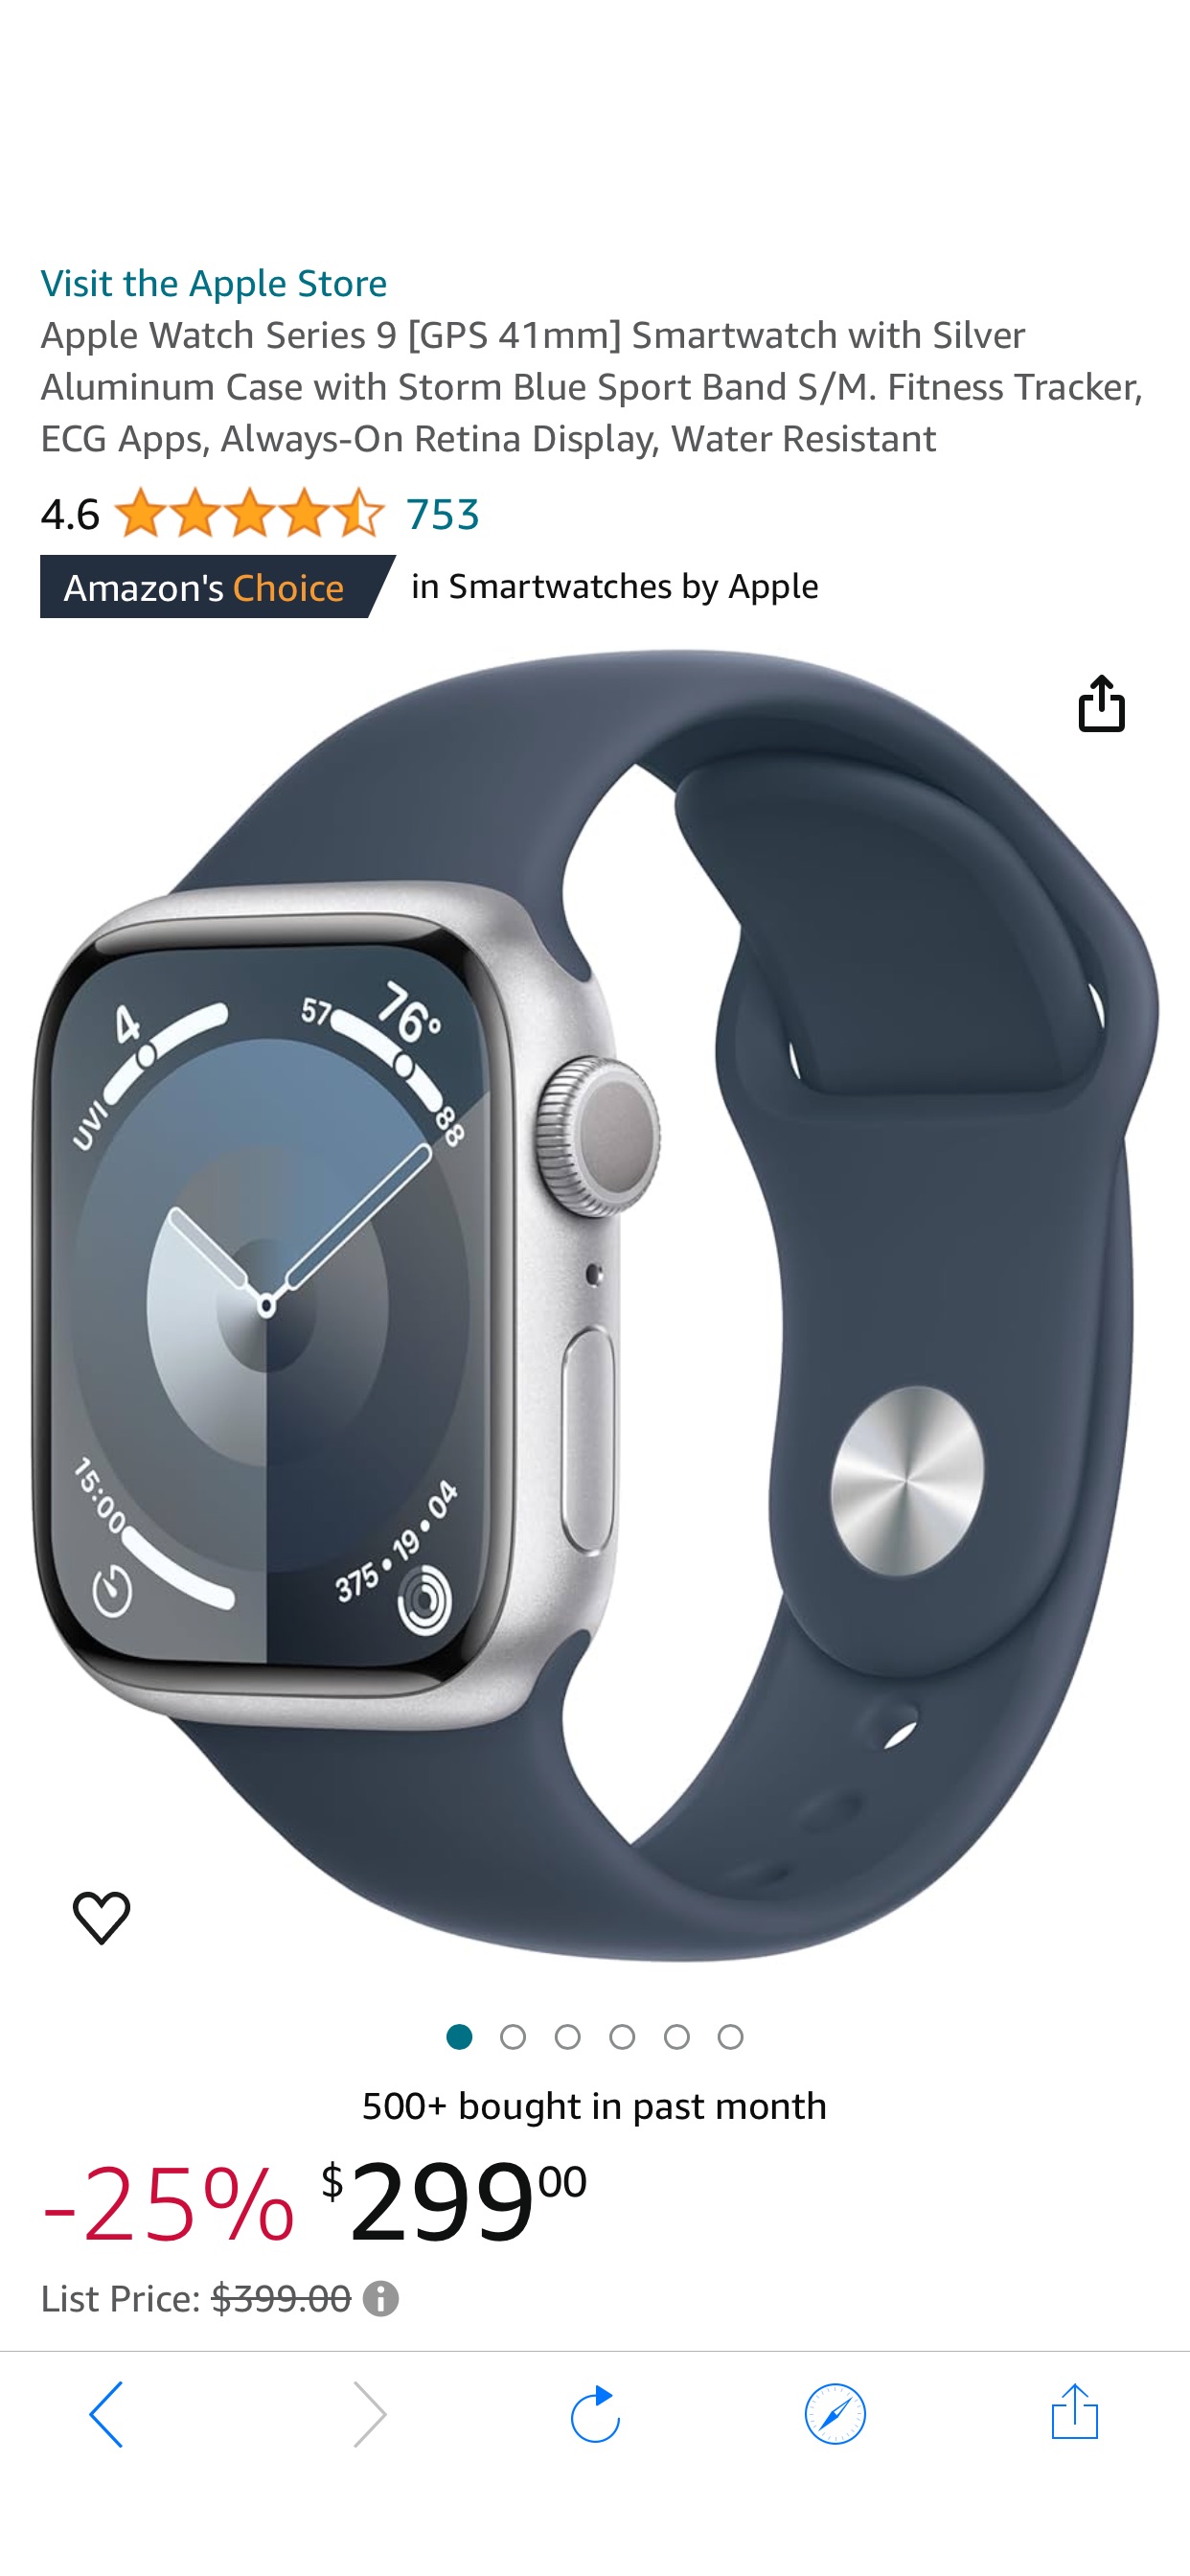 Amazon.com: Apple Watch Series 9 [GPS 41mm] Smartwatch with Silver Aluminum Case with Storm Blue Sport Band S/M. Fitness Tracker, ECG Apps, Always-On Retina Display, Water Resistant : Electronics苹果手表